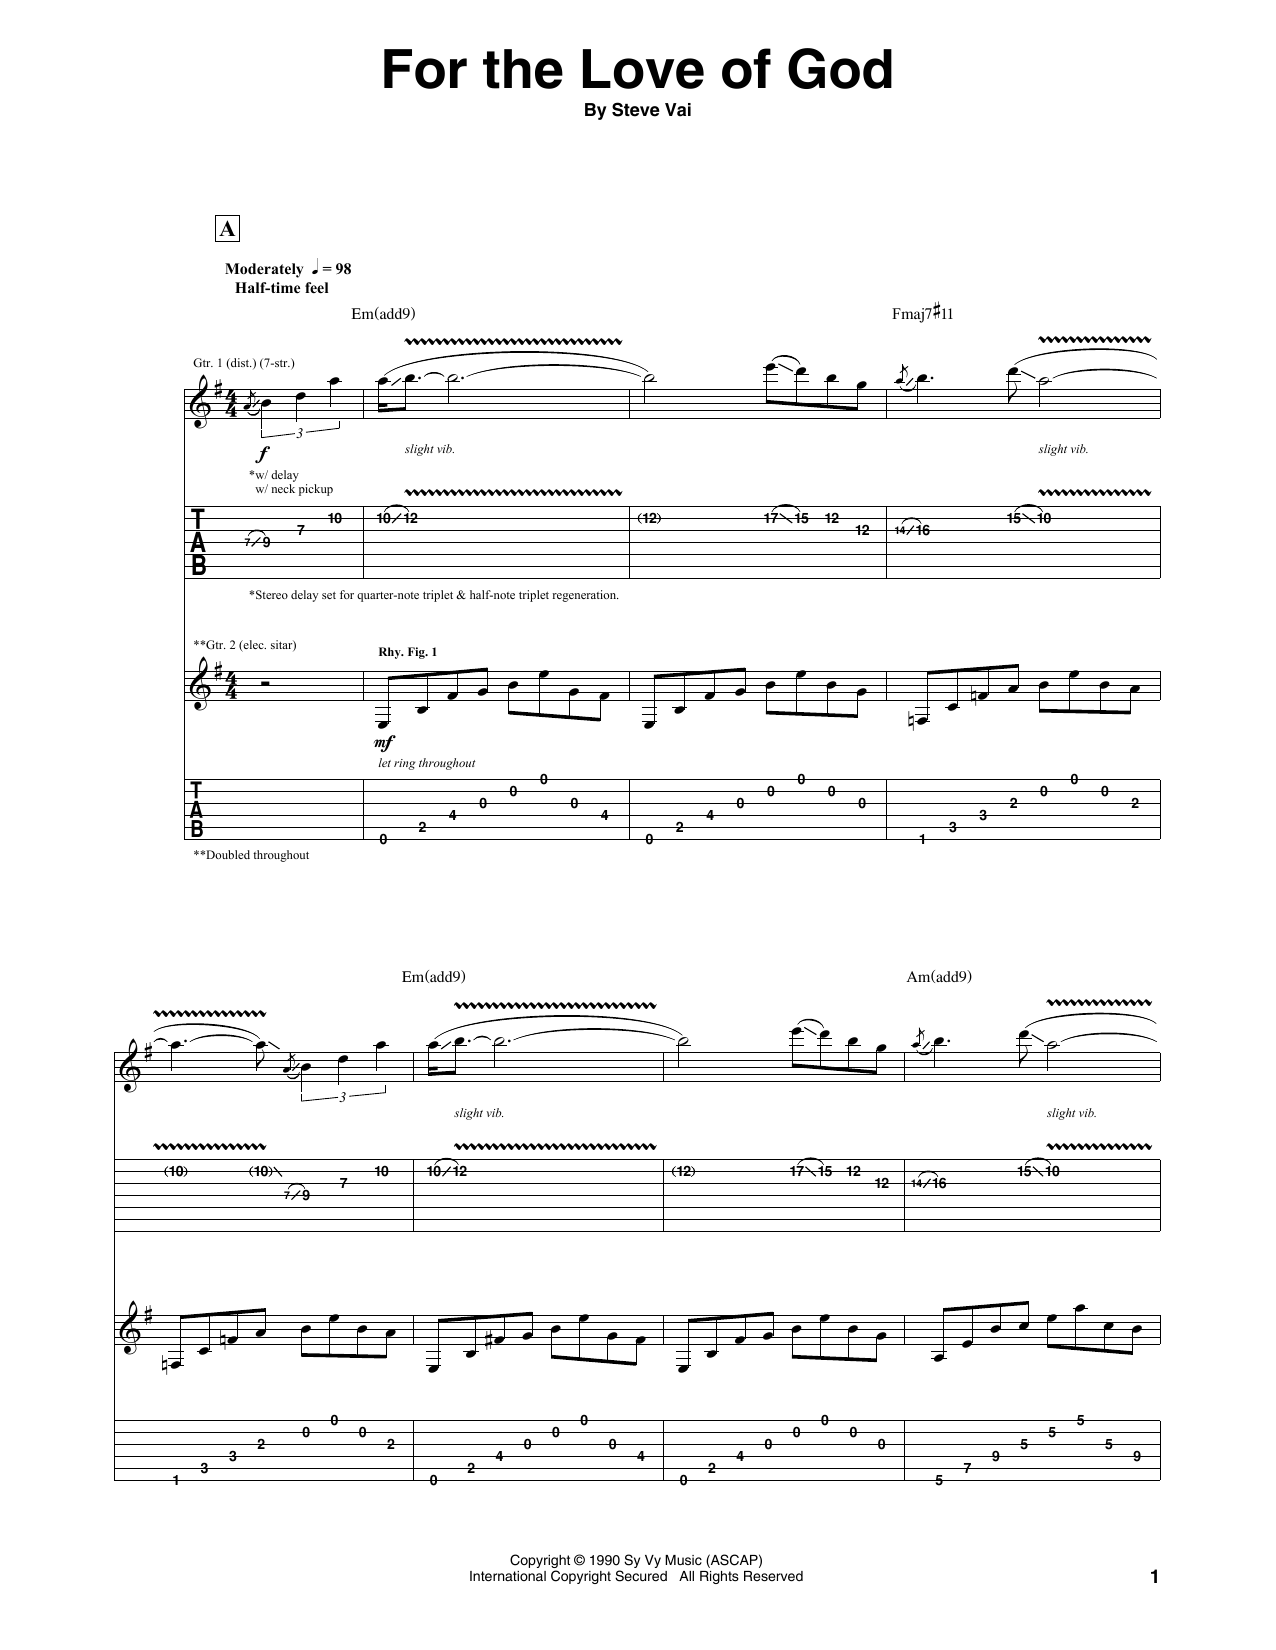 Download Steve Vai For The Love Of God Sheet Music